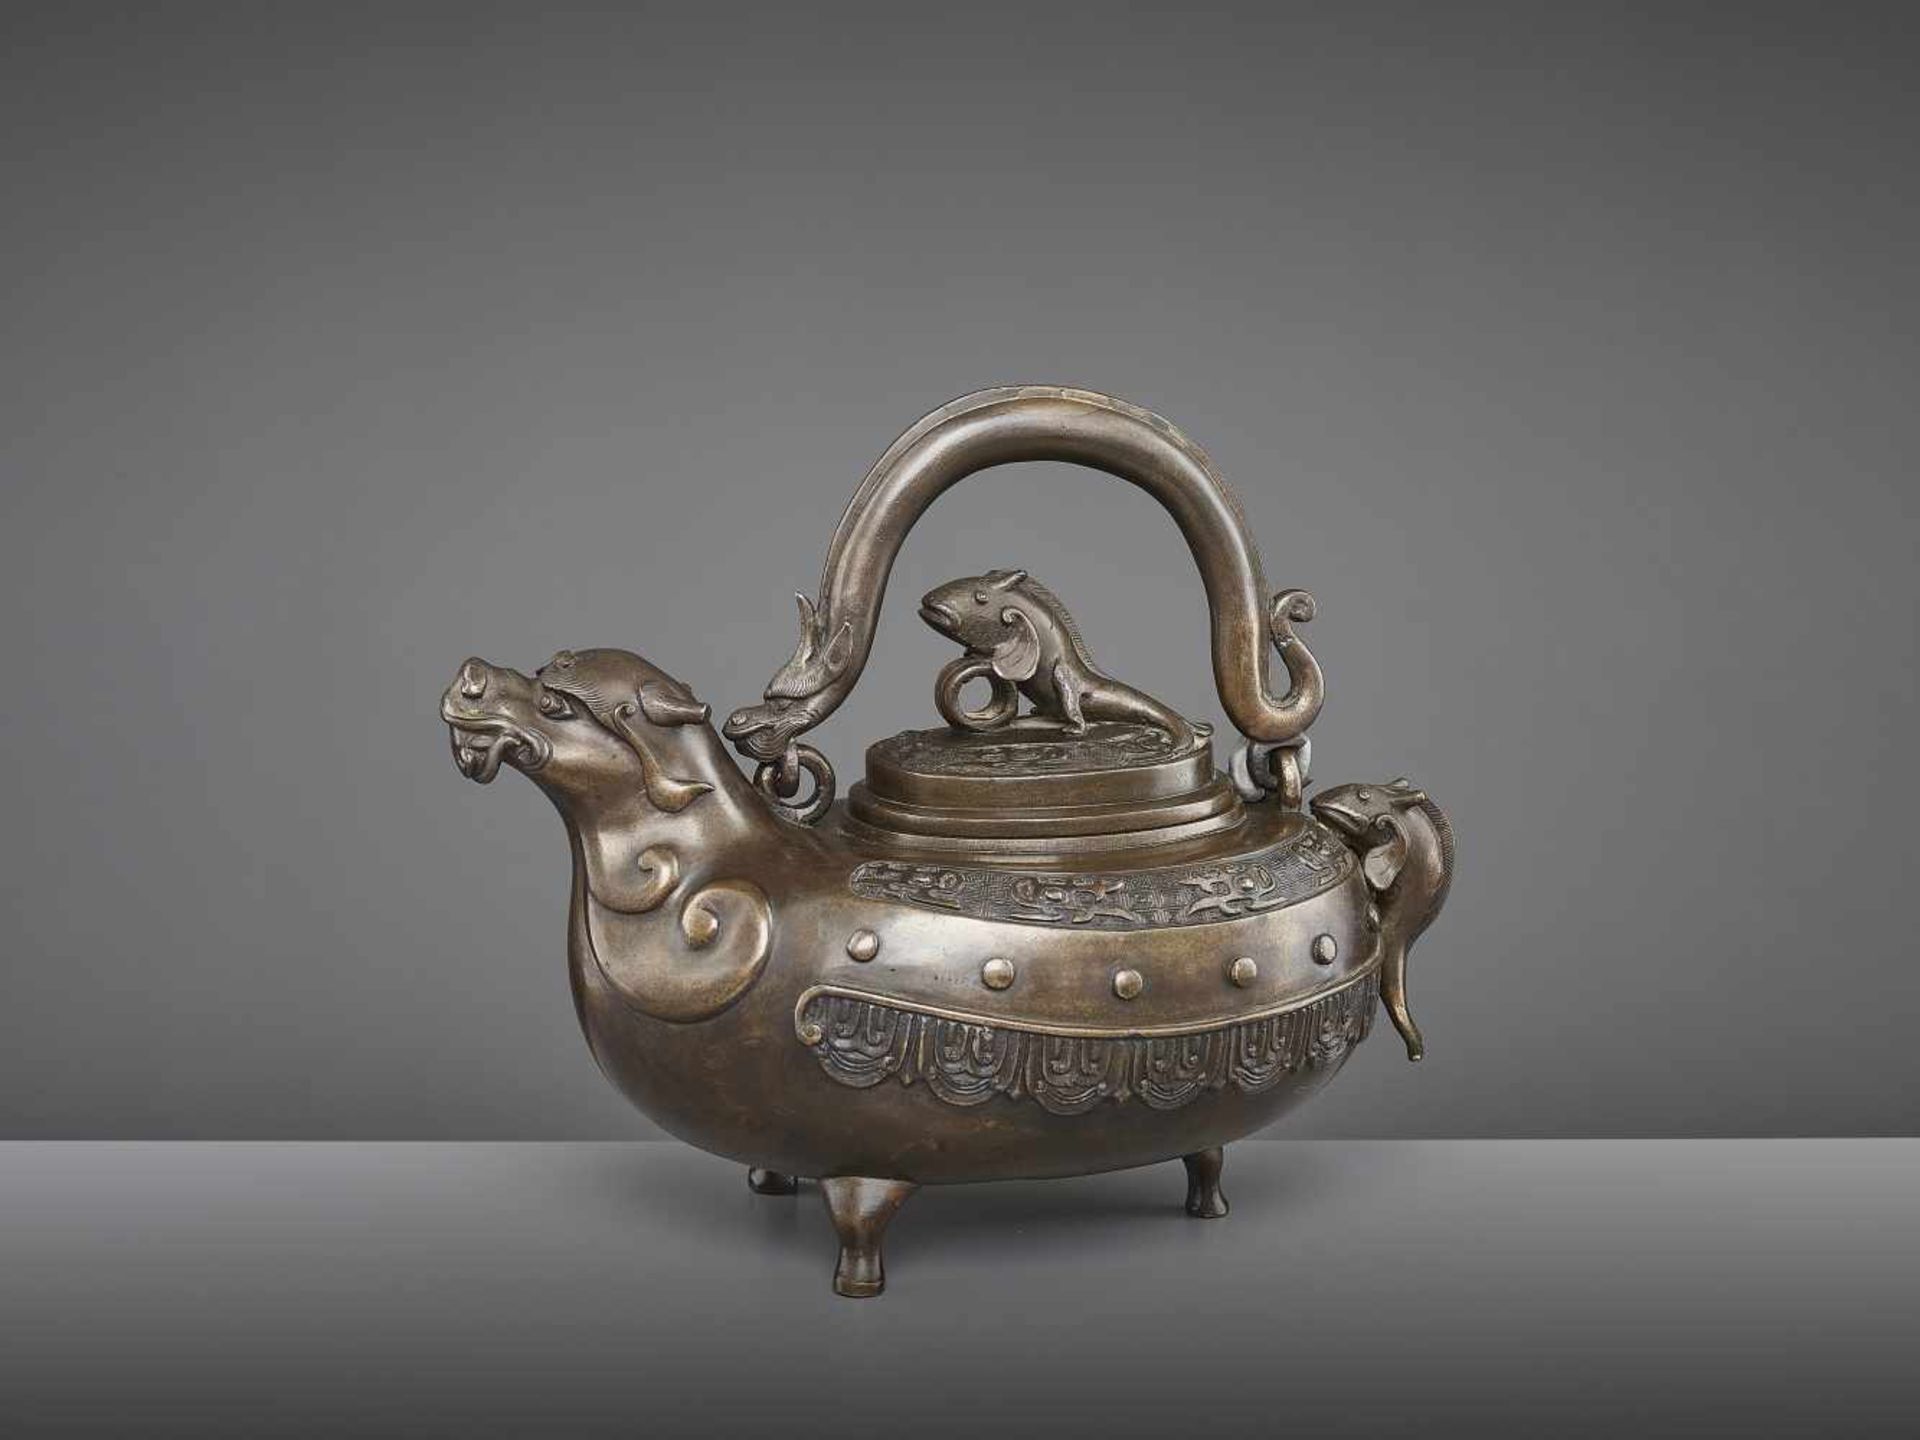 A BRONZE DRAGON EWER, QING China, 18th - 19th century. The lidded tripod vessel with a dragon head